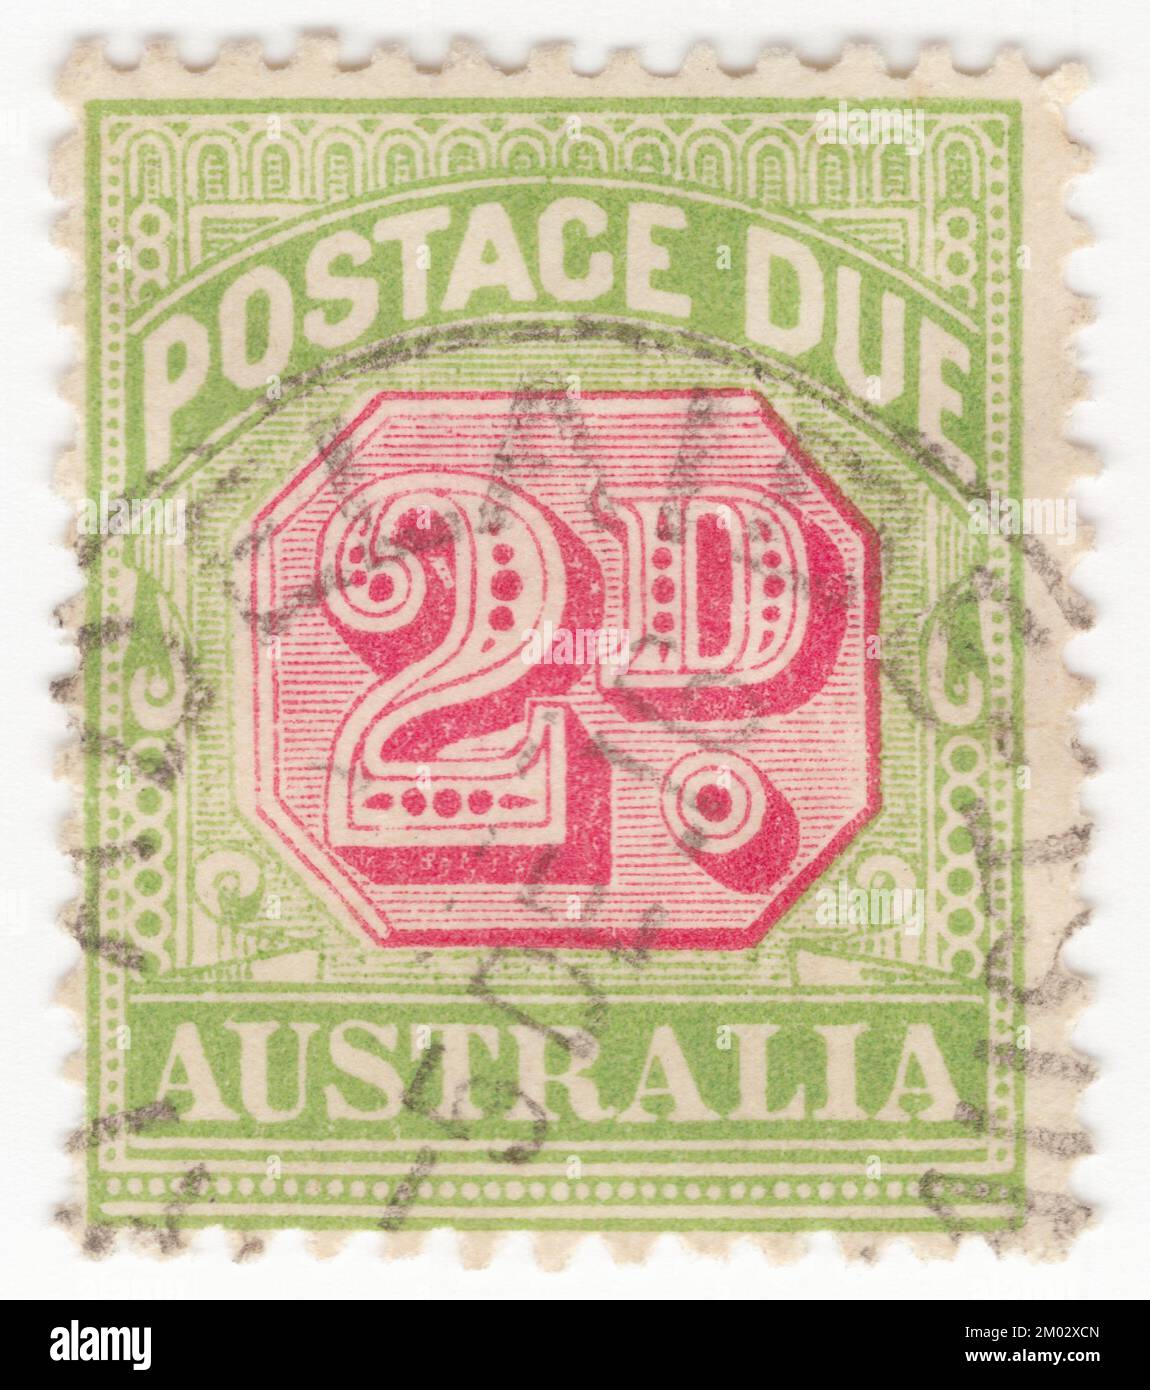 AUSTRALIA — 1909: An 1 pence green and carmine Postage Due stamp depicting Numeral and ornament. Australia, officially the Commonwealth of Australia, is a sovereign country comprising the mainland of the Australian continent, the island of Tasmania, and numerous smaller islands. Australia is the oldest, flattest, and driest inhabited continent, with the least fertile soils. It is a megadiverse country, and its size gives it a wide variety of landscapes and climates, with deserts in the centre, tropical rainforests in the north-east, and mountain ranges in the south-east Stock Photo